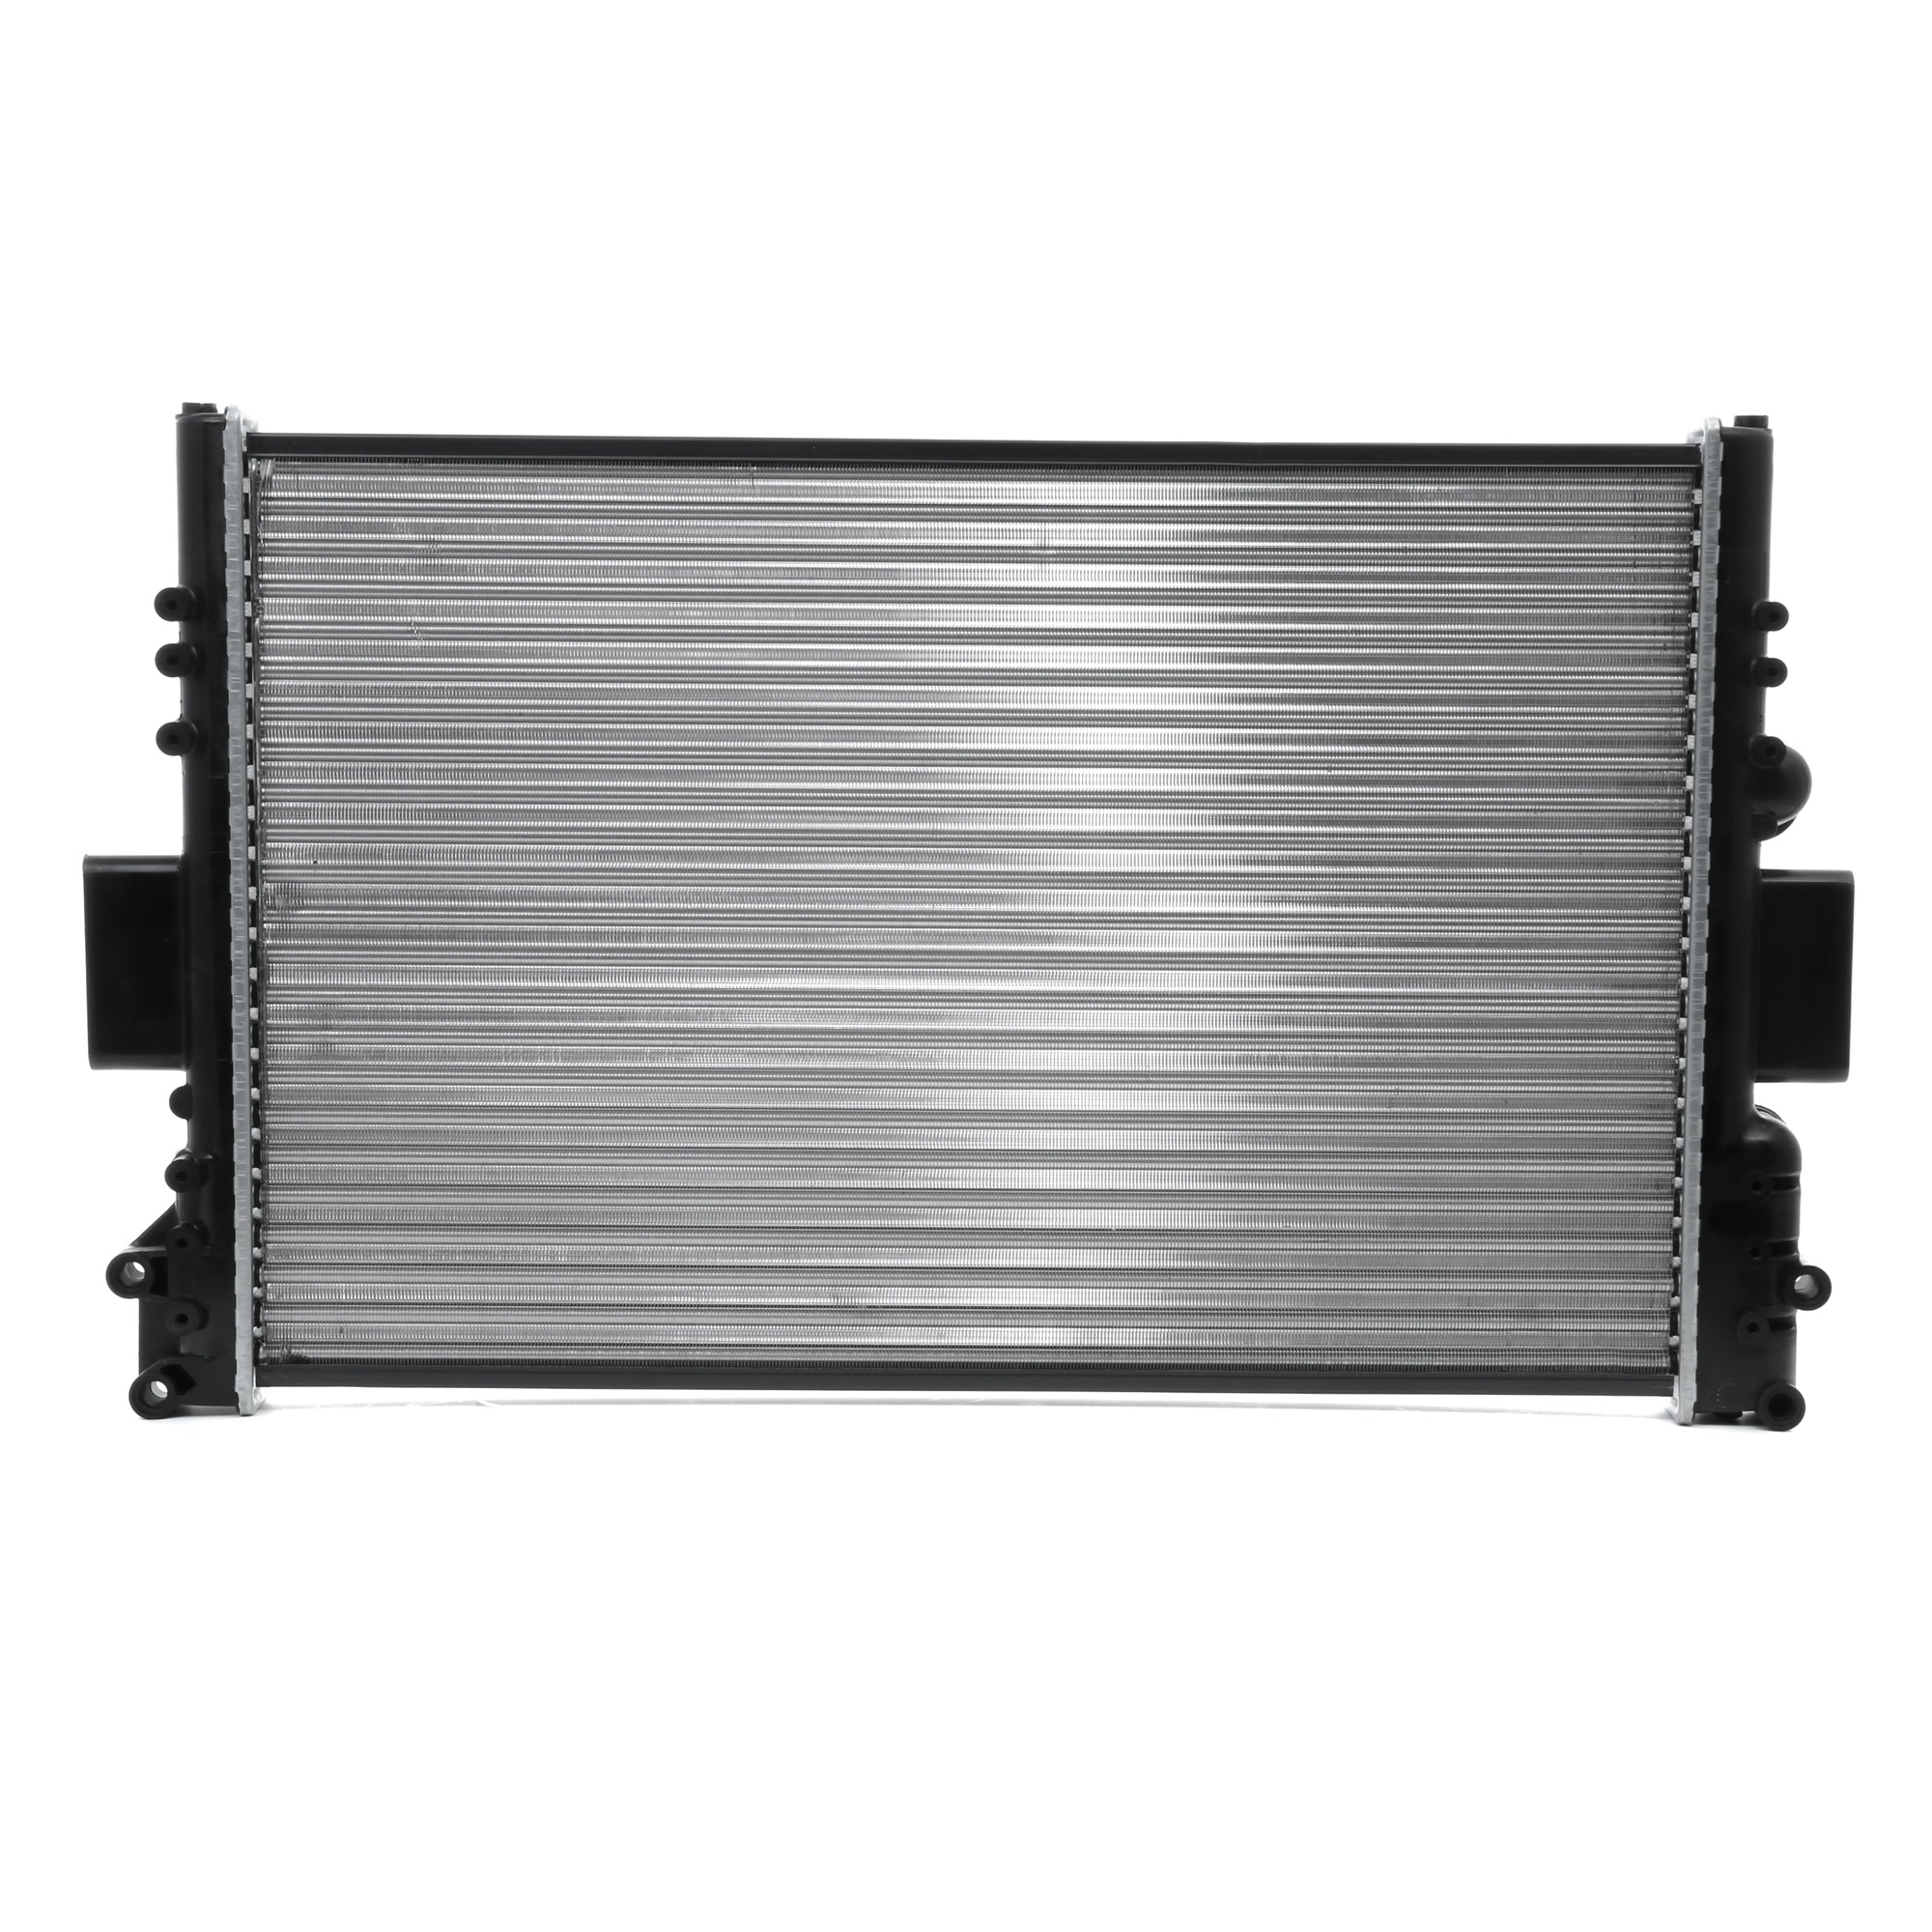 STARK SKRD-0120539 Engine radiator Aluminium, for vehicles with/without air conditioning, Manual Transmission, Mechanically jointed cooling fins